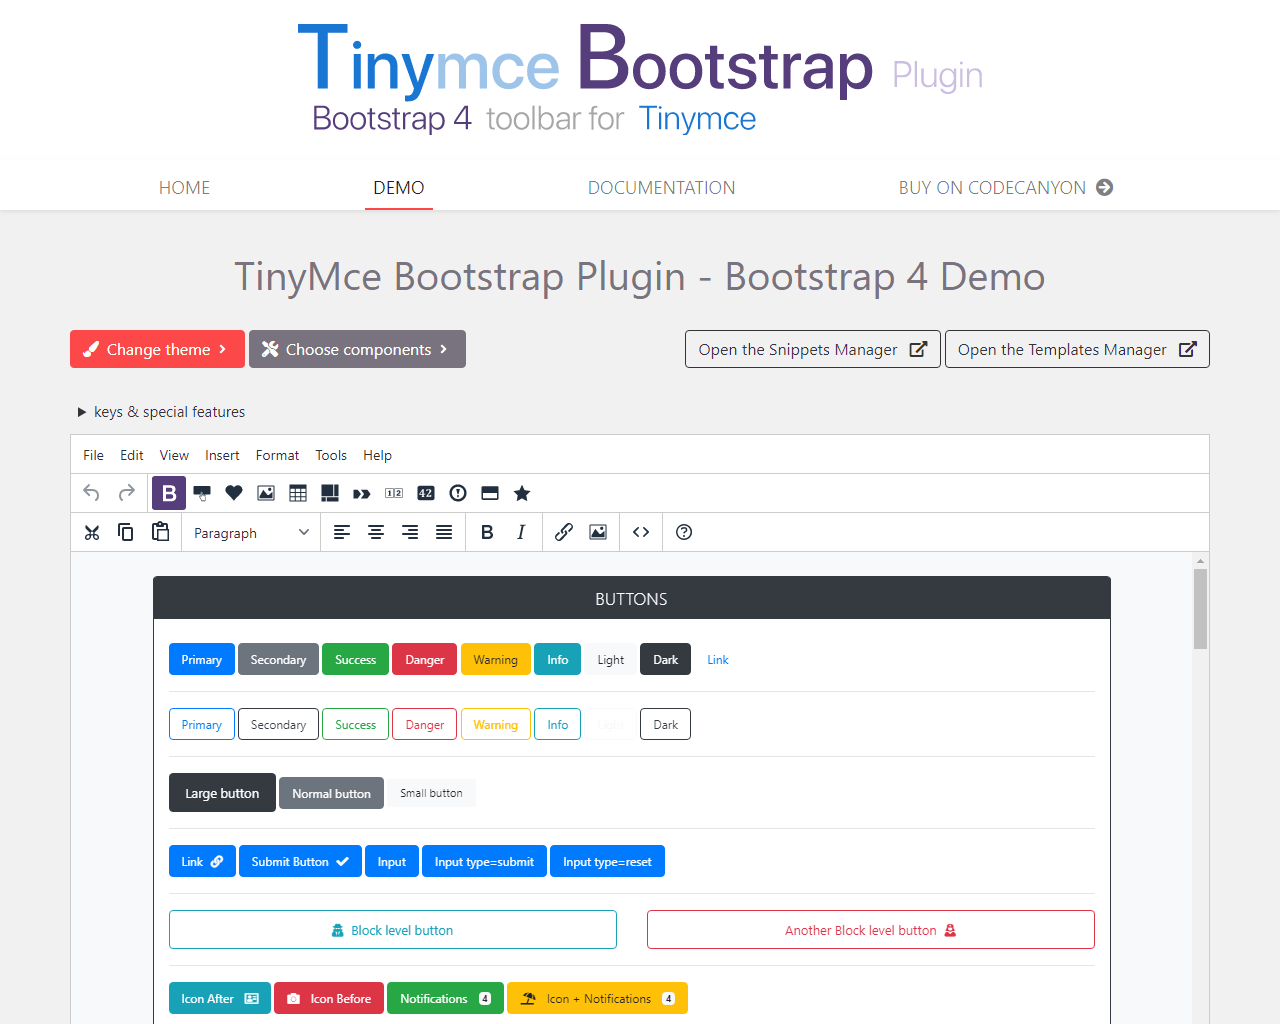 TinyMce Bootstrap plugin's home page